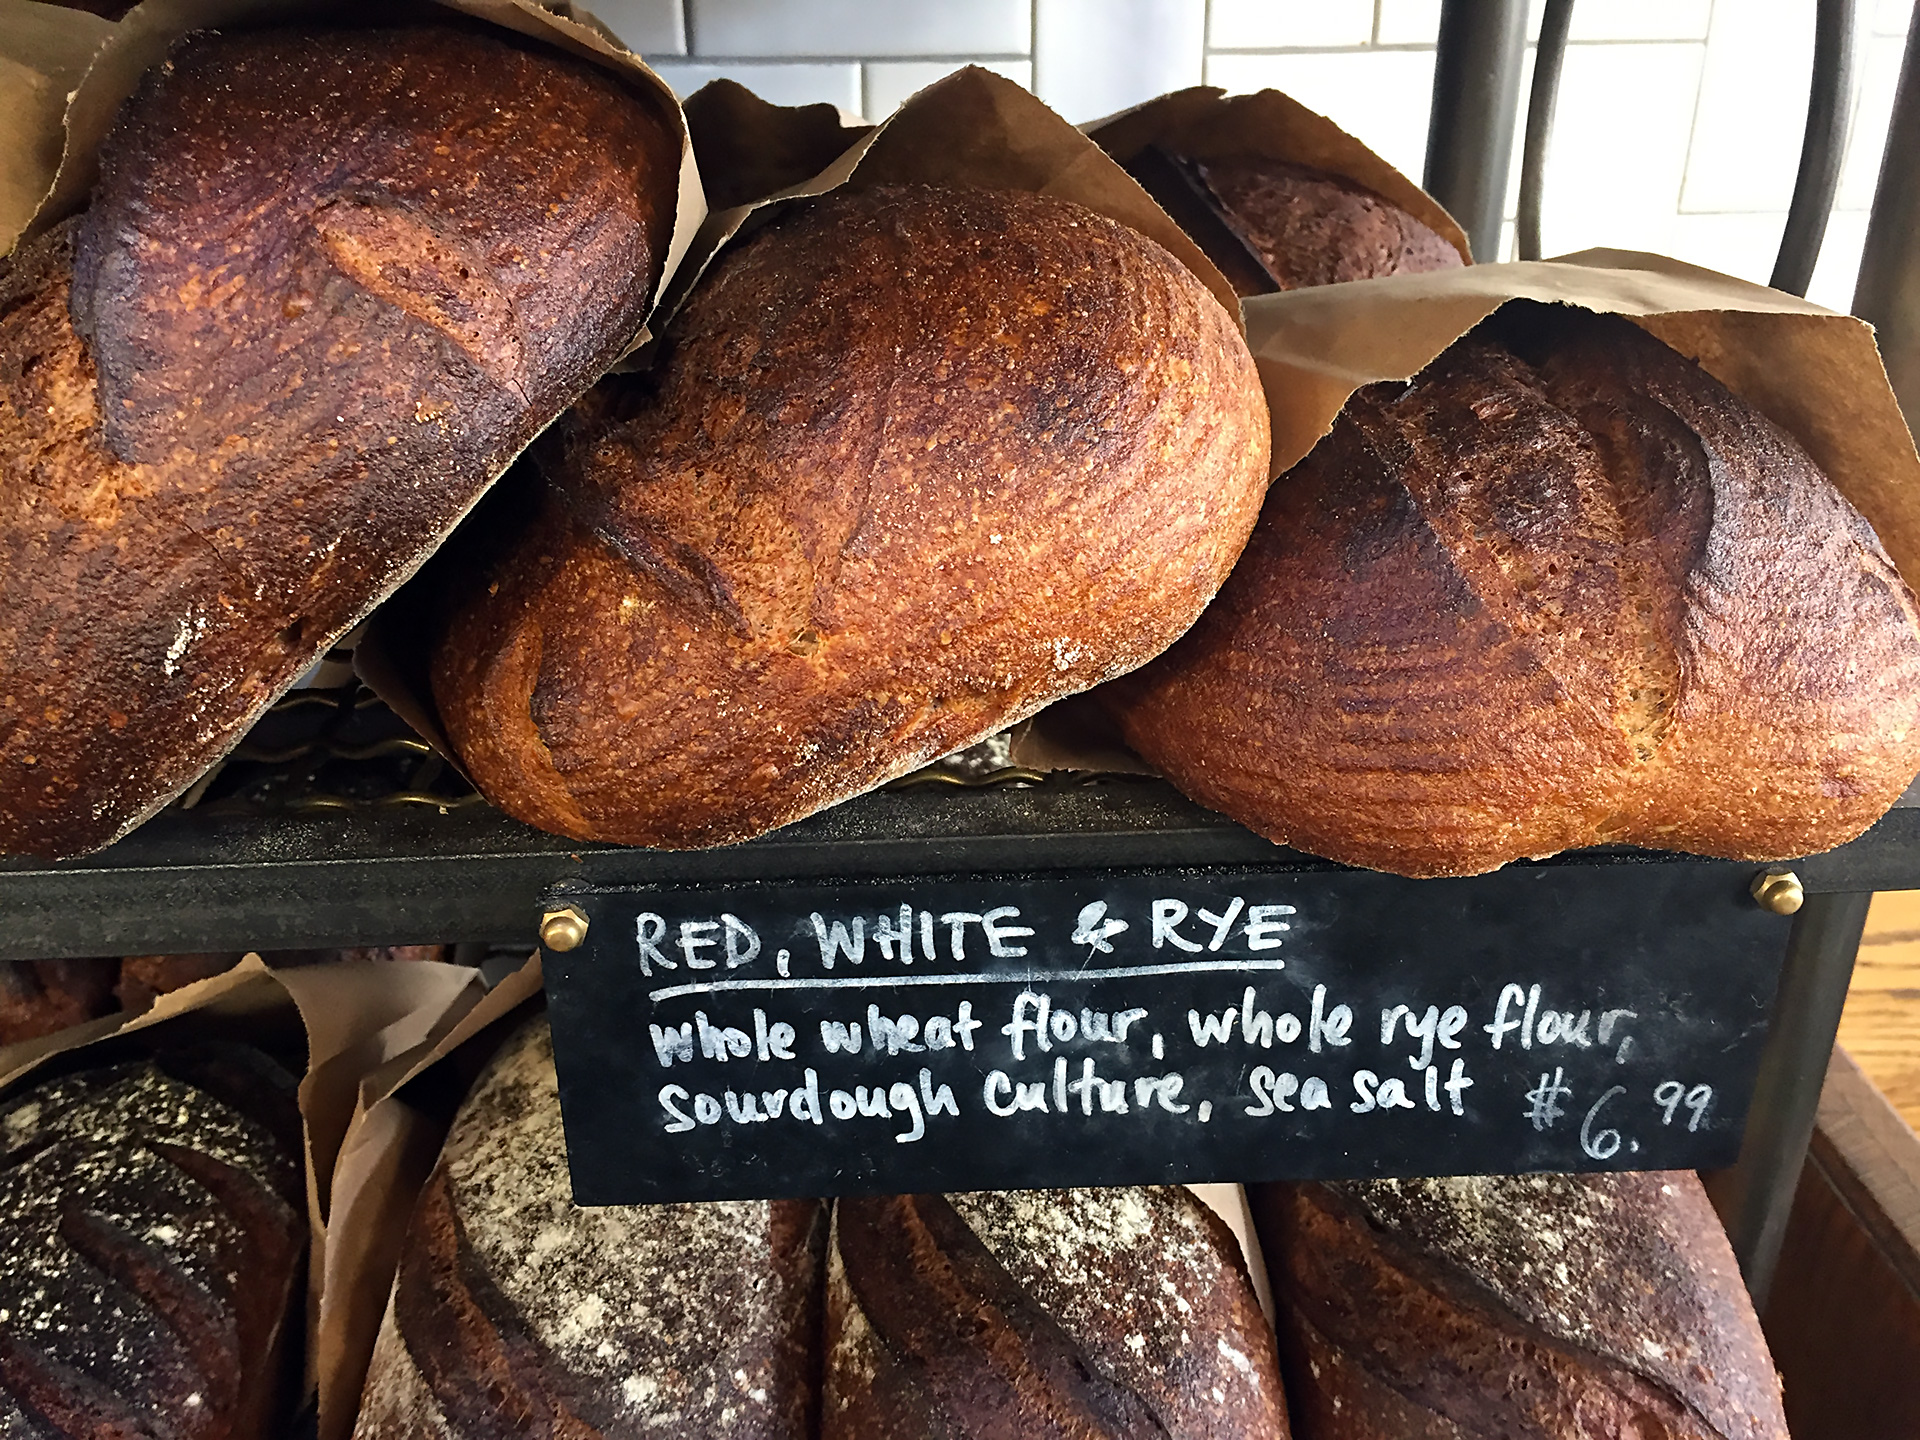 Josey Baker Red, White & Rye bread for sale at The Mill.